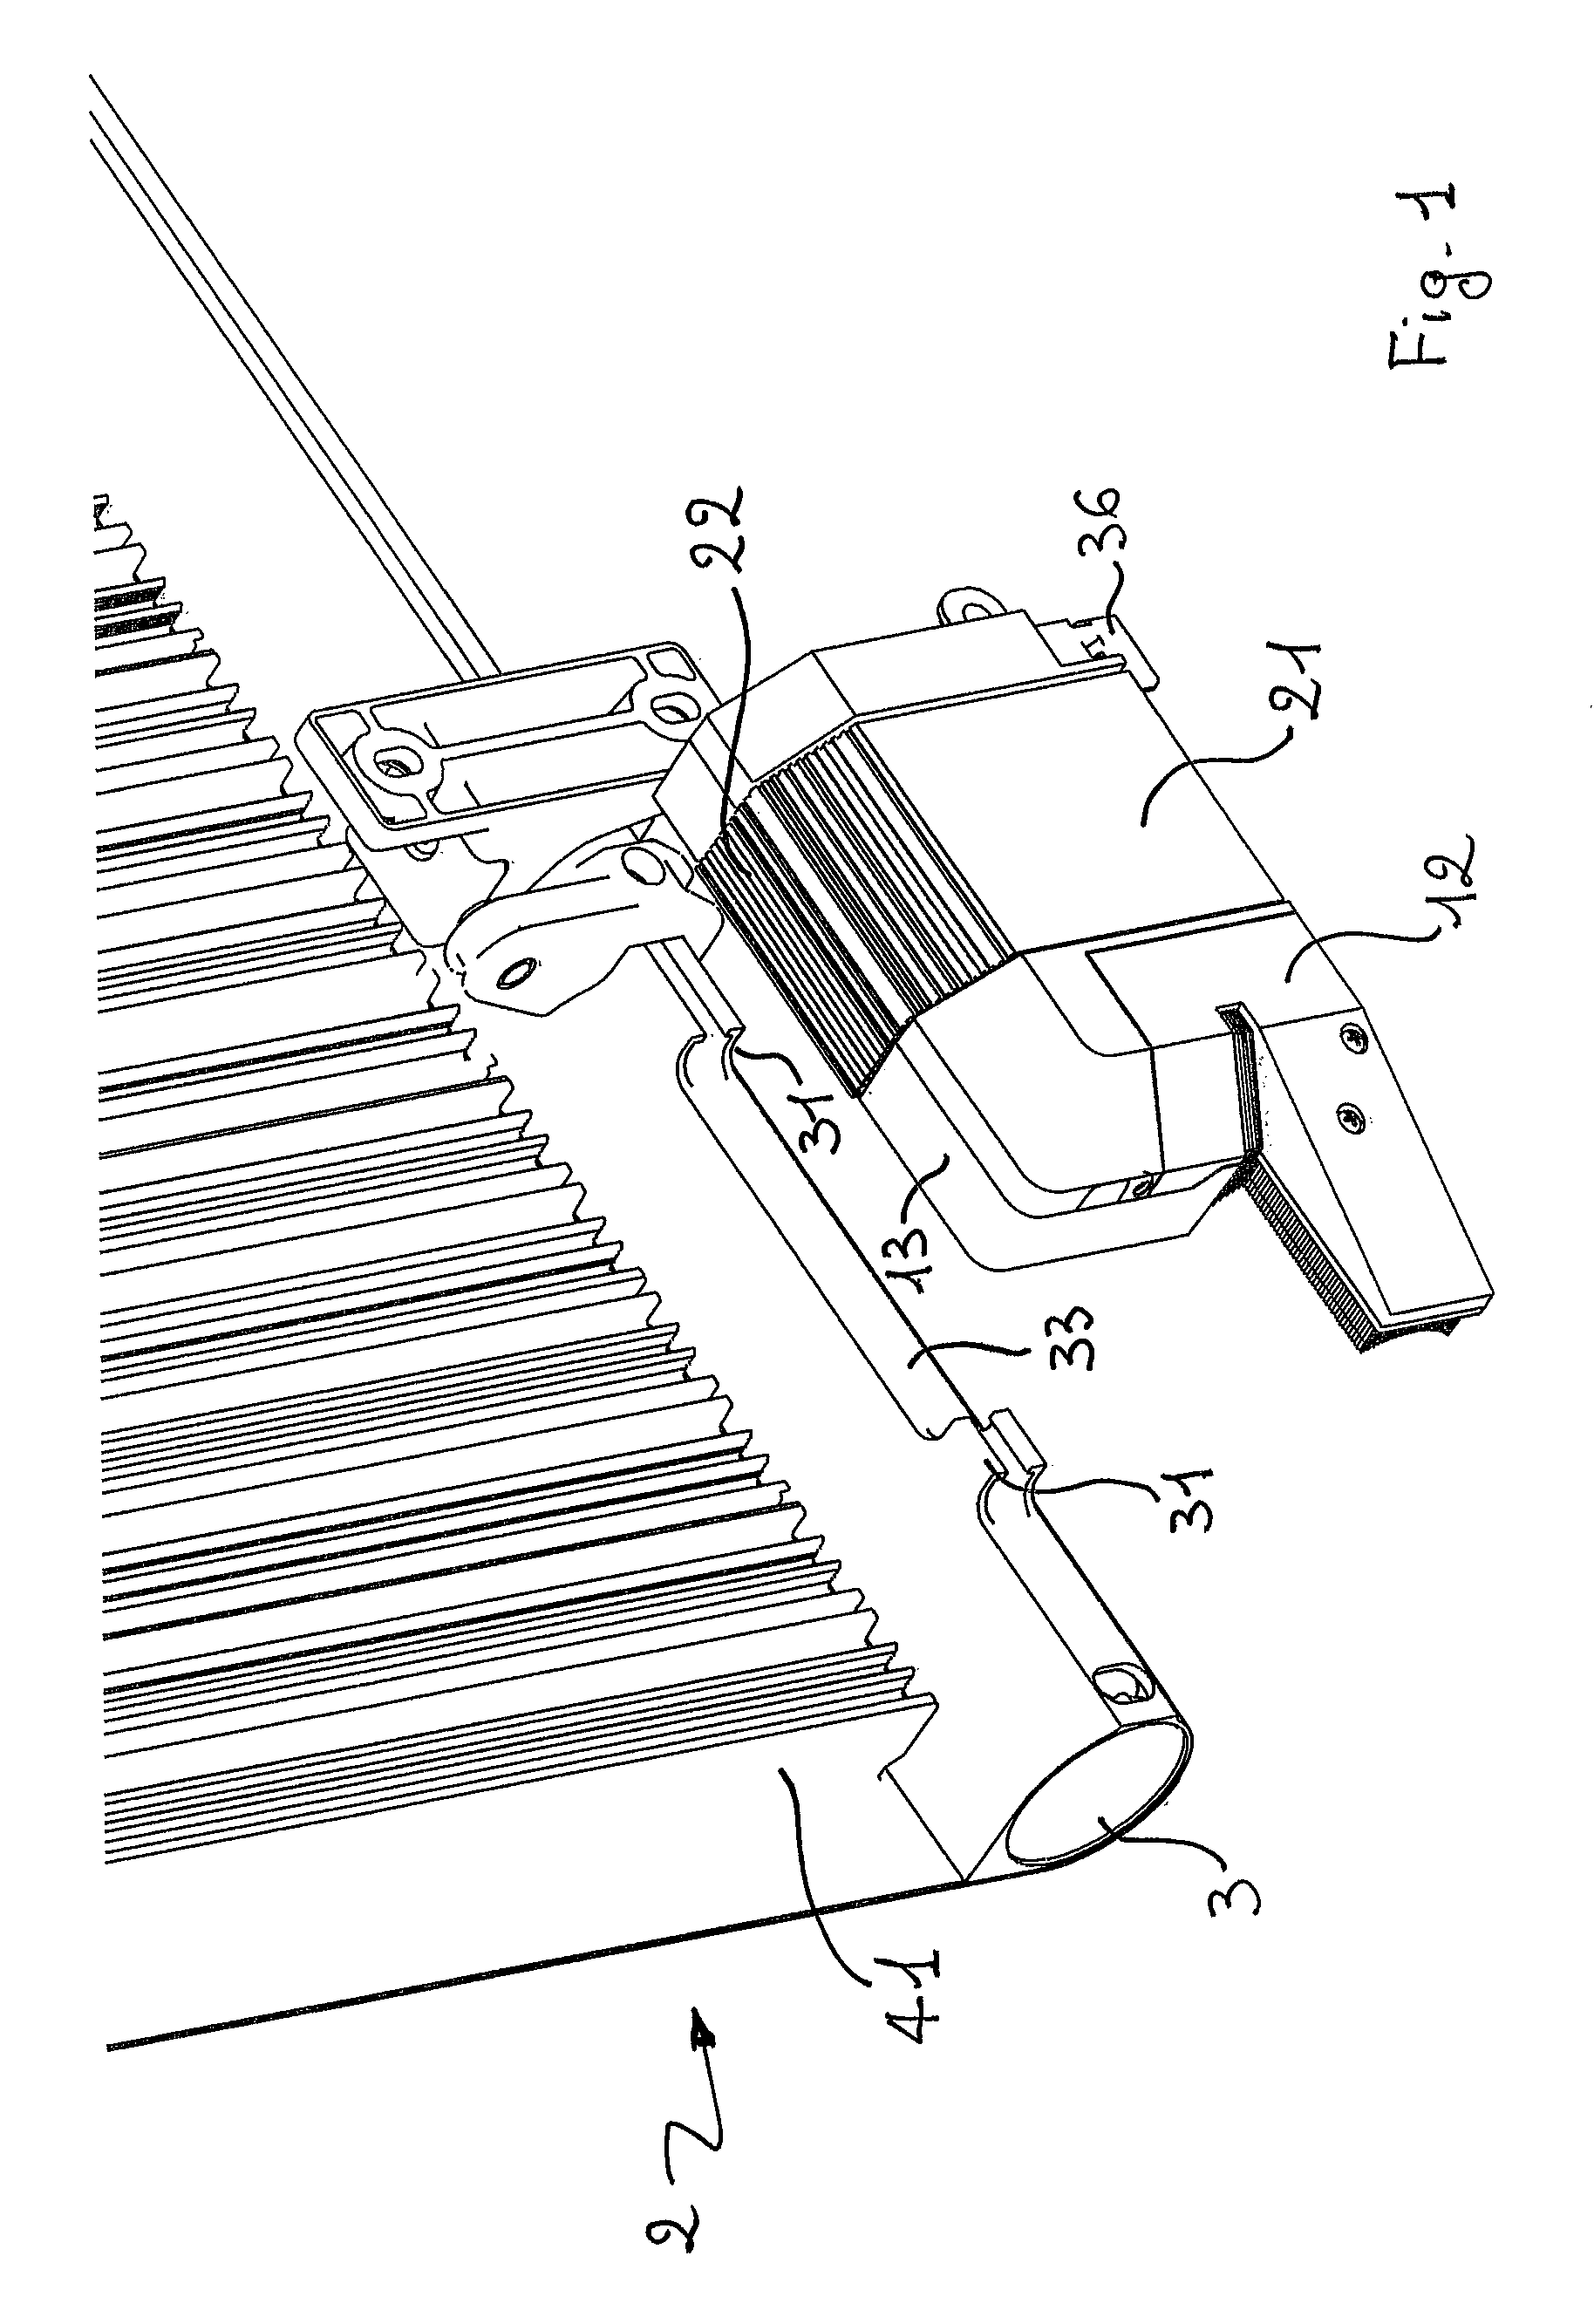 Radiator, in particular for room heating